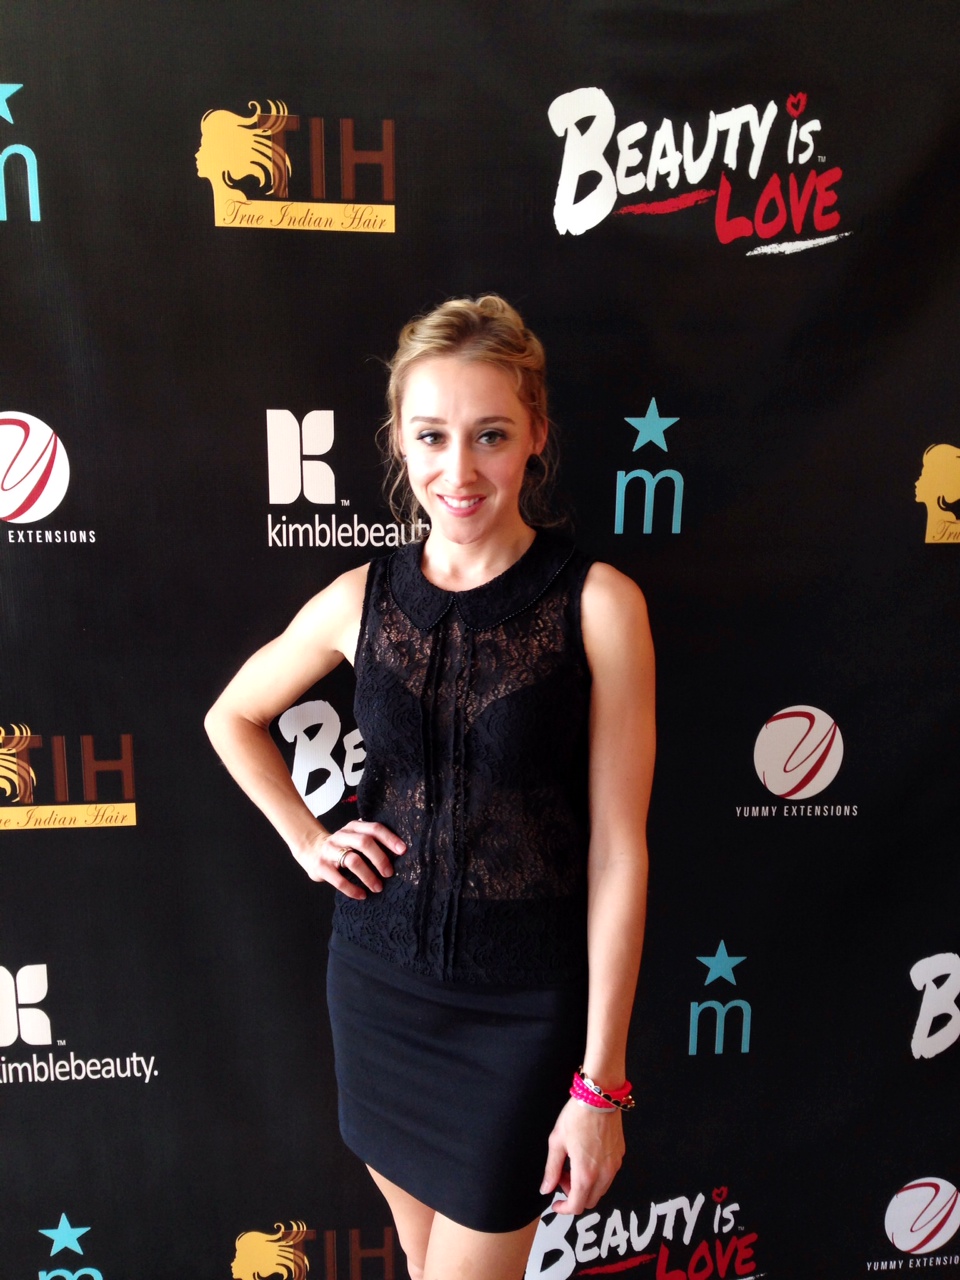 Lindsay Seim attends pre-Grammys event Beauty is Love